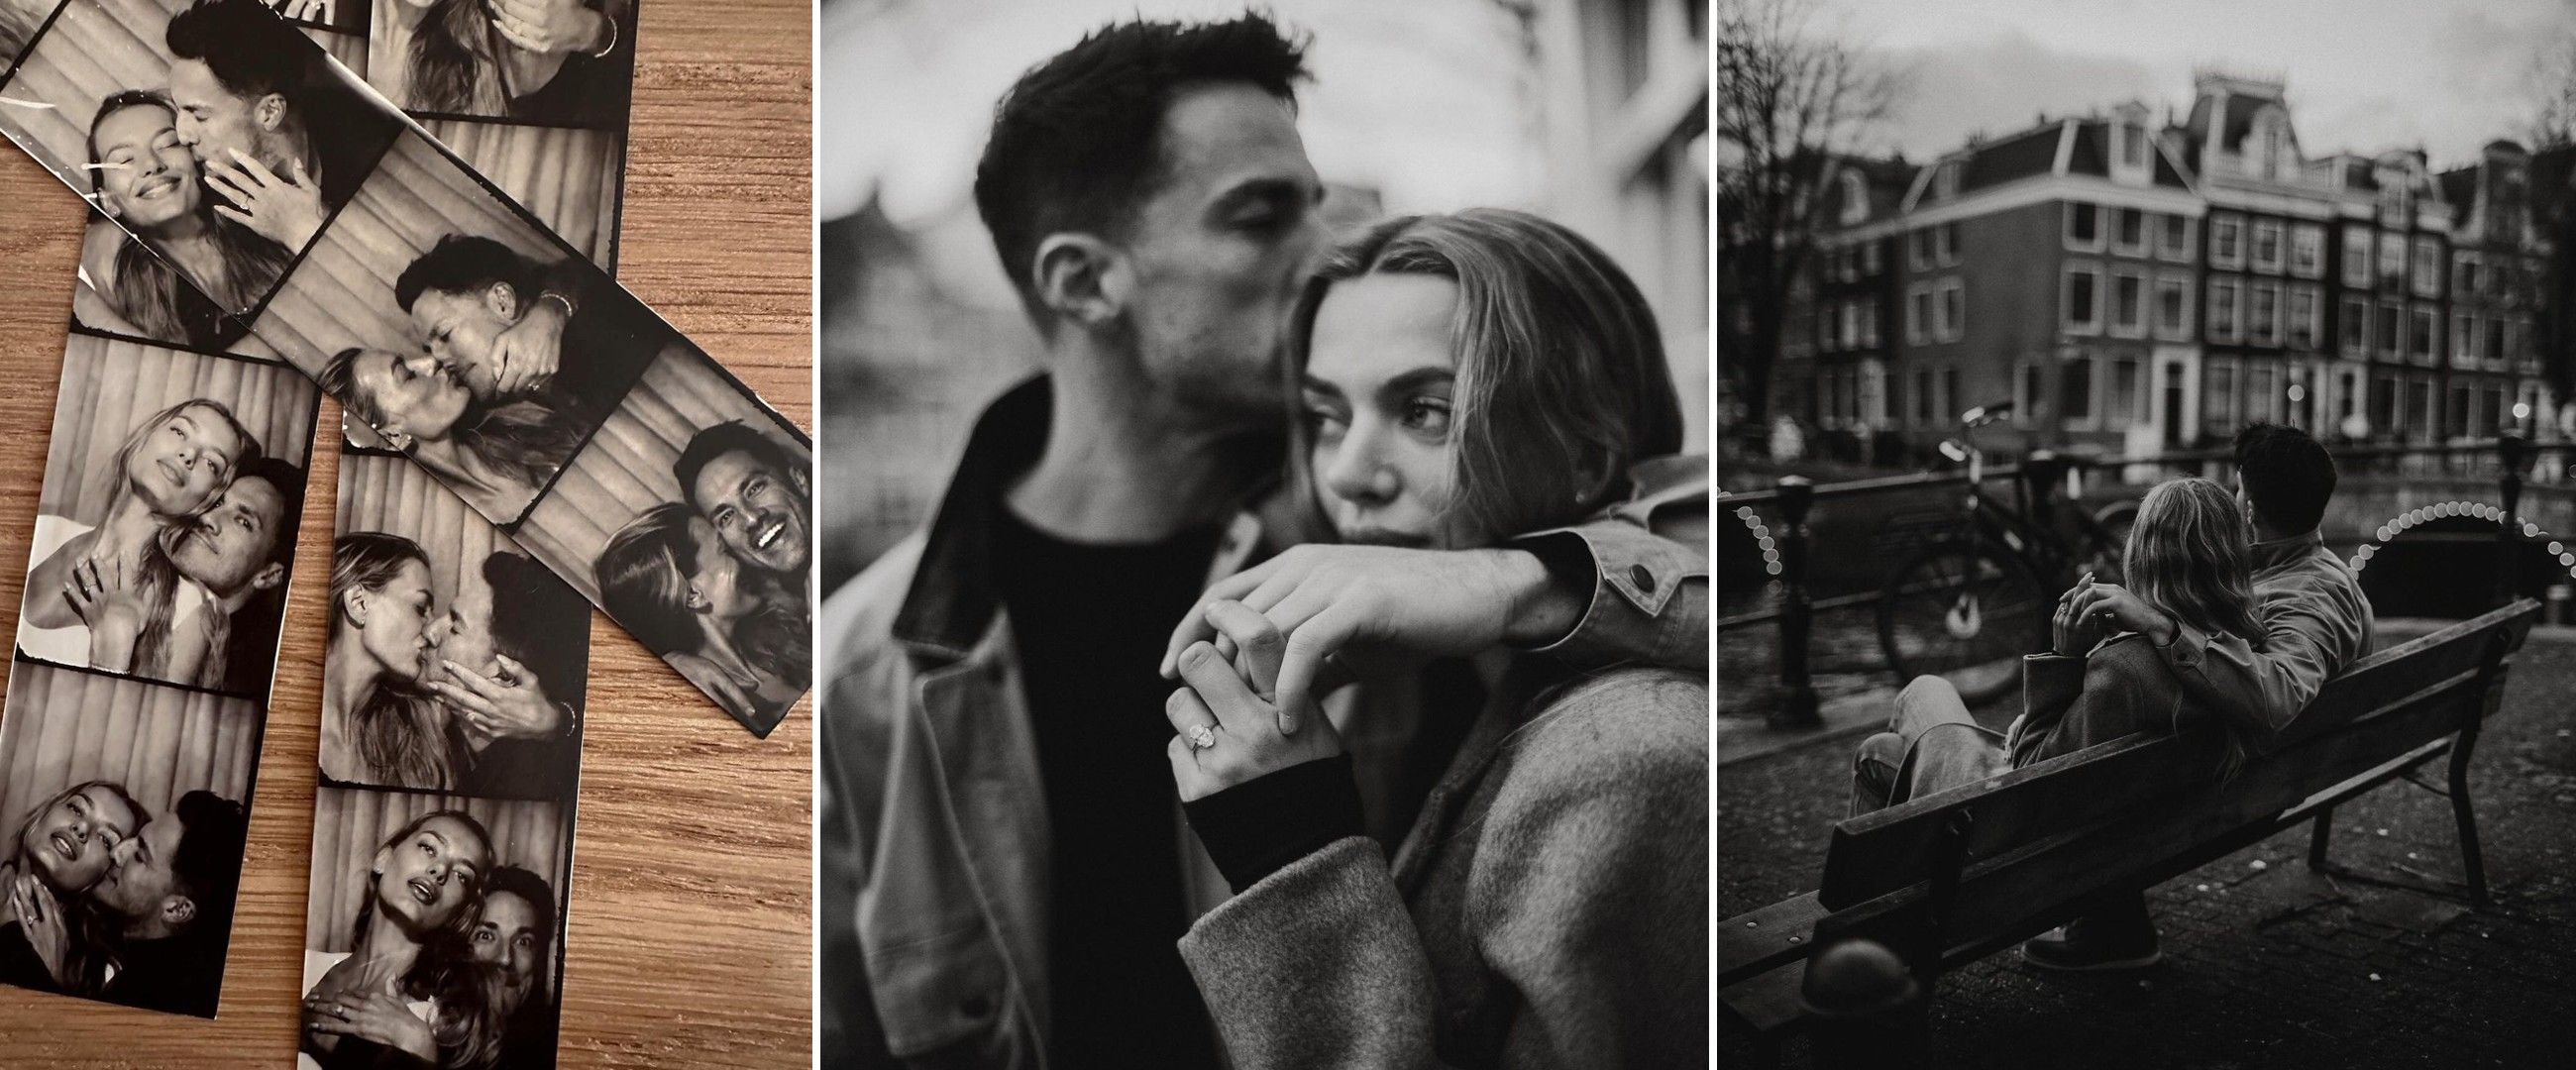 Star of The Vampire Diaries Michael Trevino is Engaged to Model Bregje Heinen—See Her Oval Engagement Ring! image1